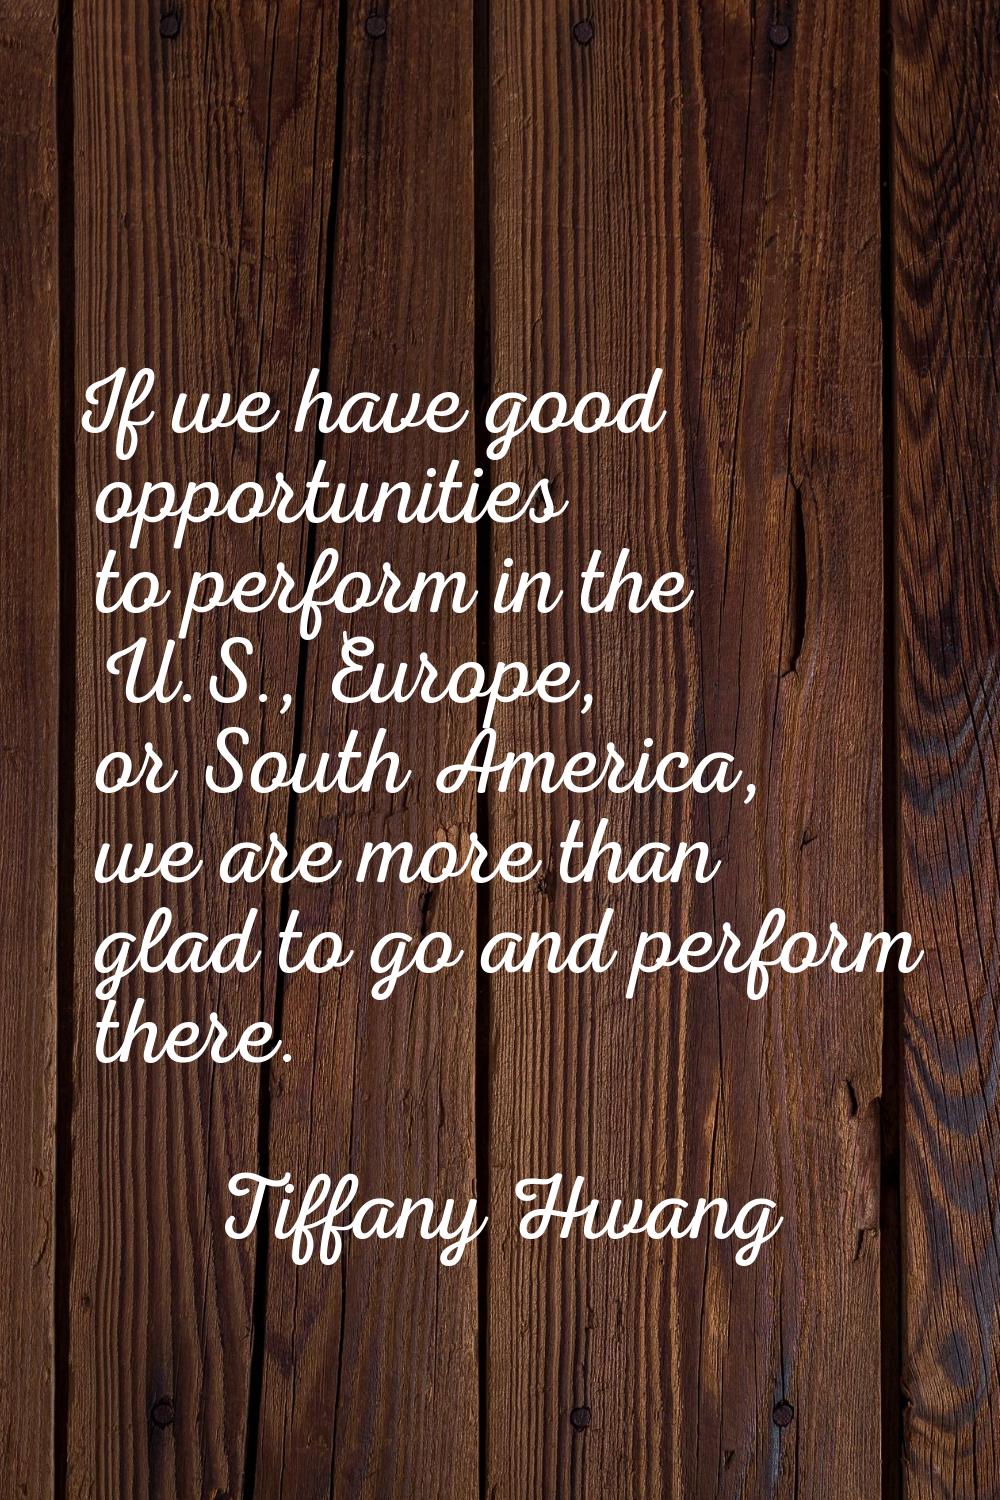 If we have good opportunities to perform in the U.S., Europe, or South America, we are more than gl